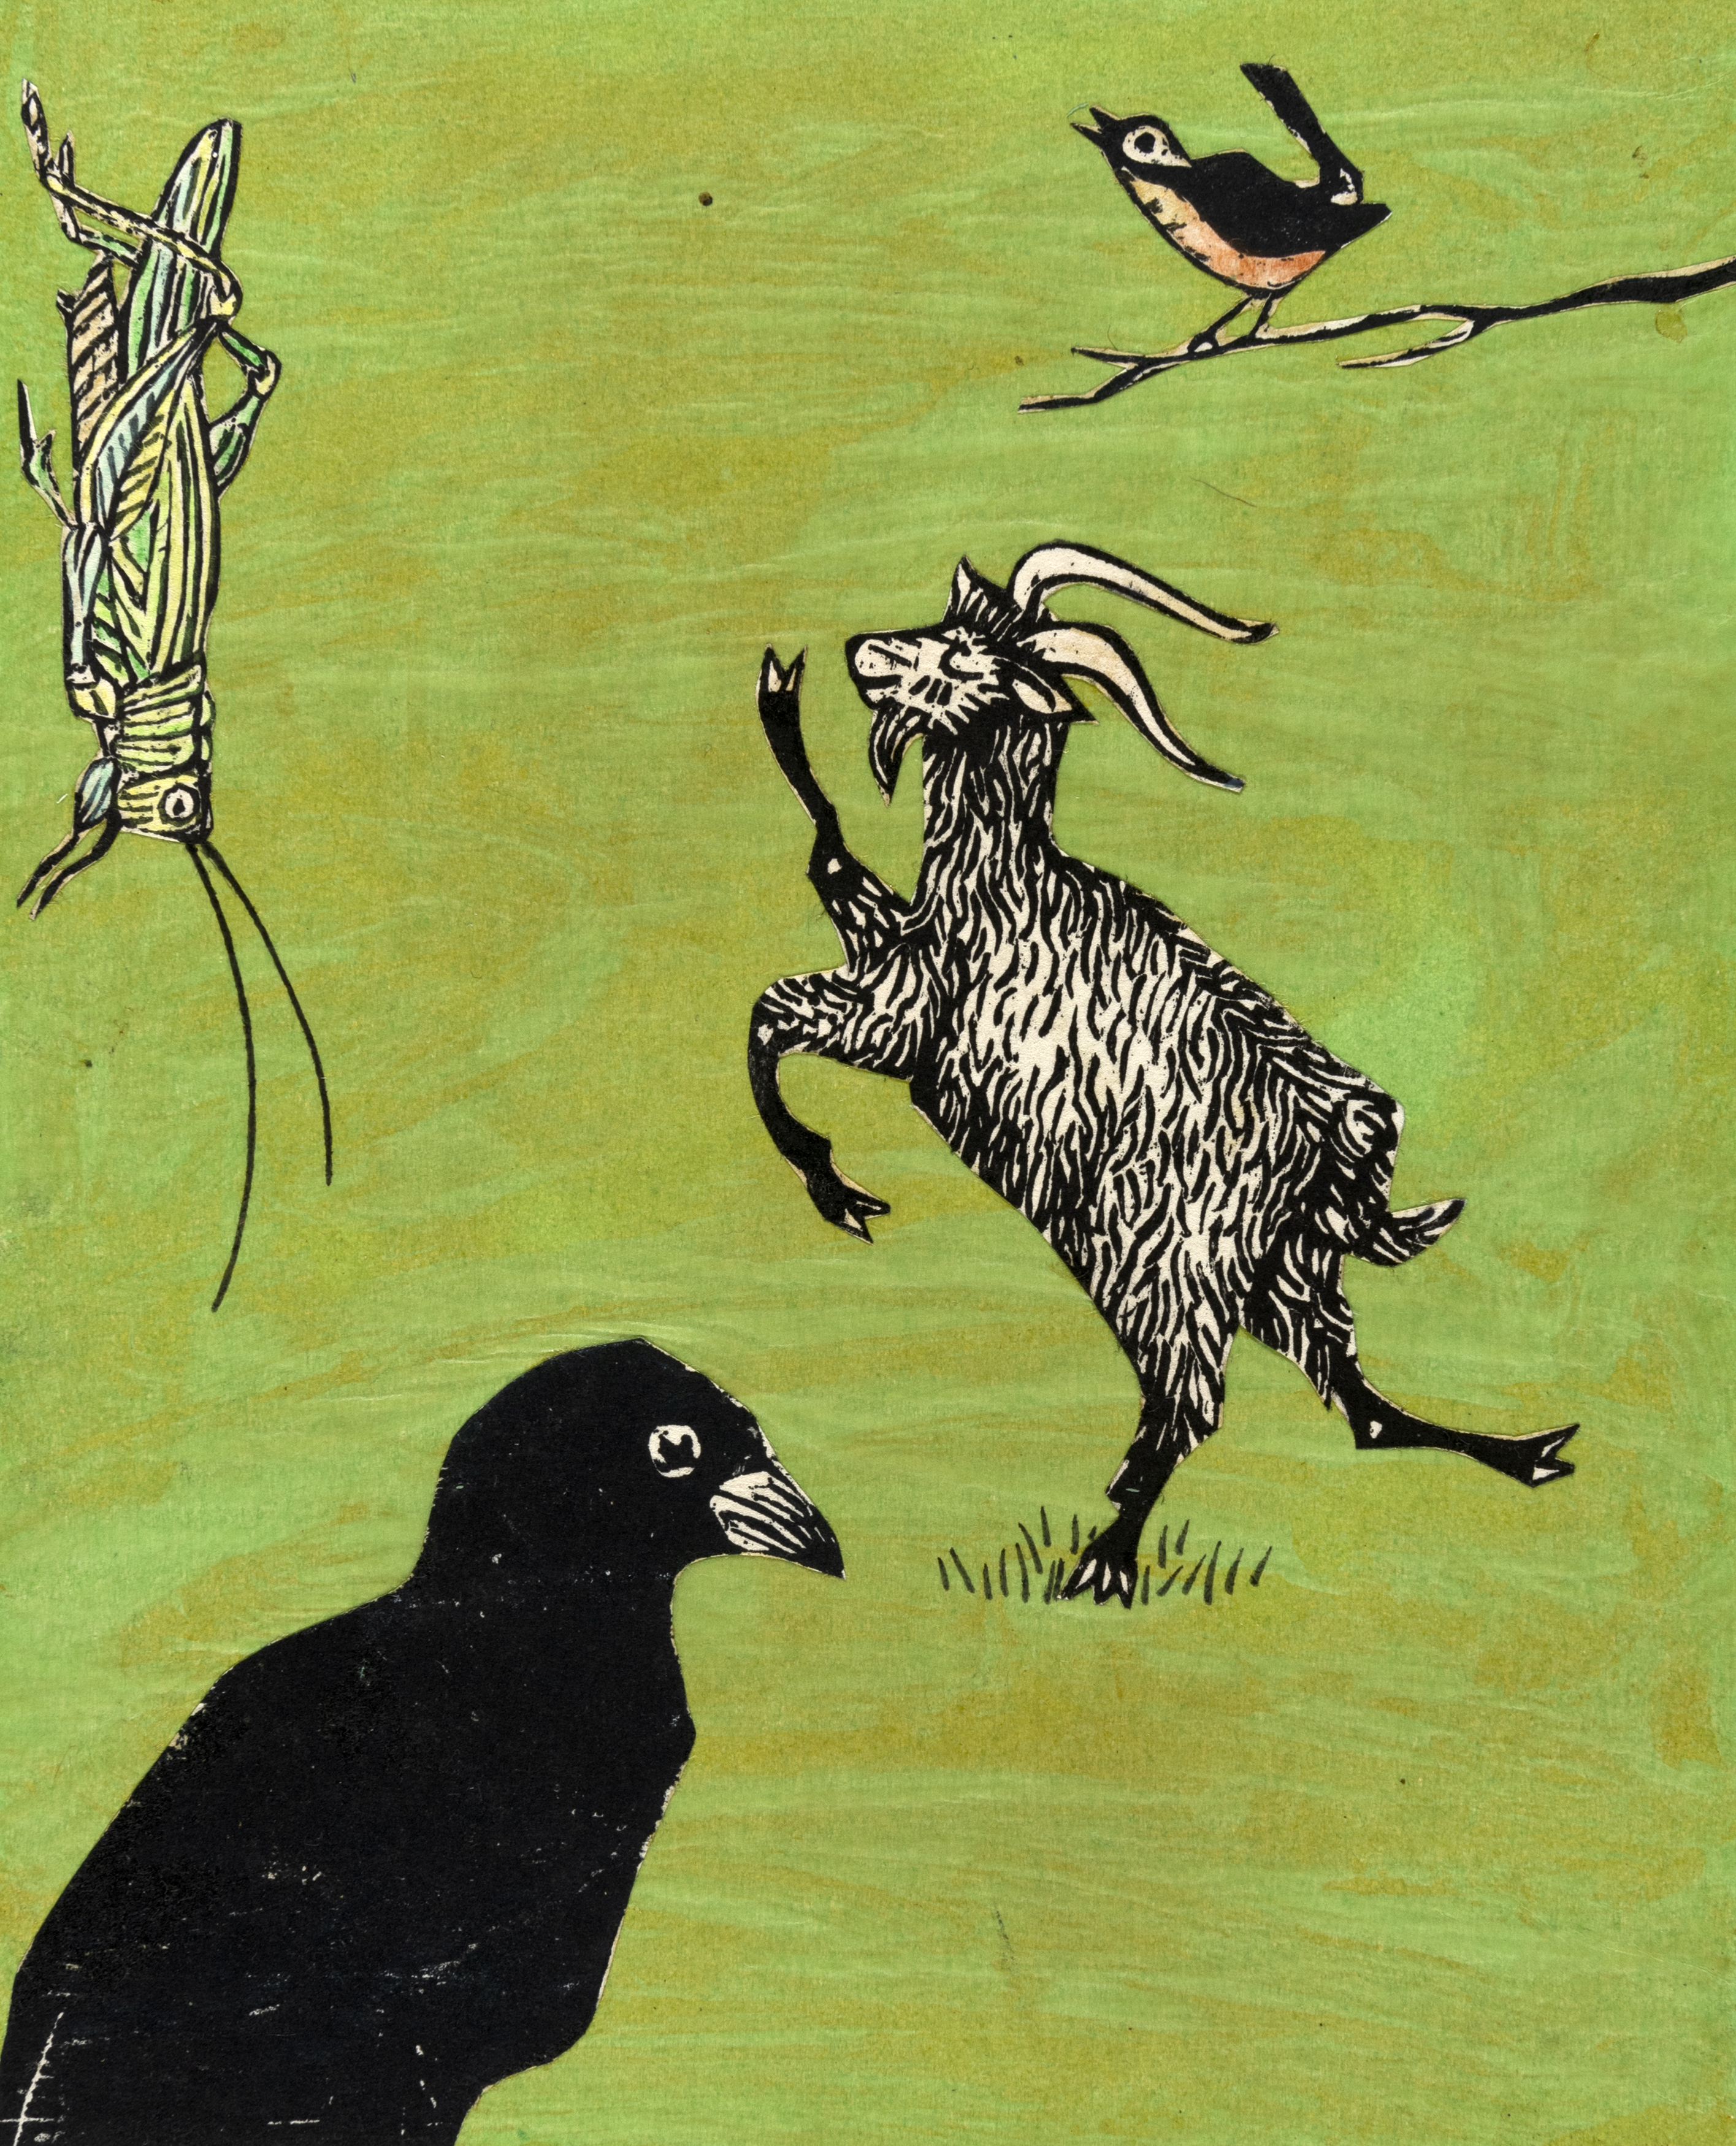 Illustration of goat, crow, cricket, and bird altogether in green landscape. 